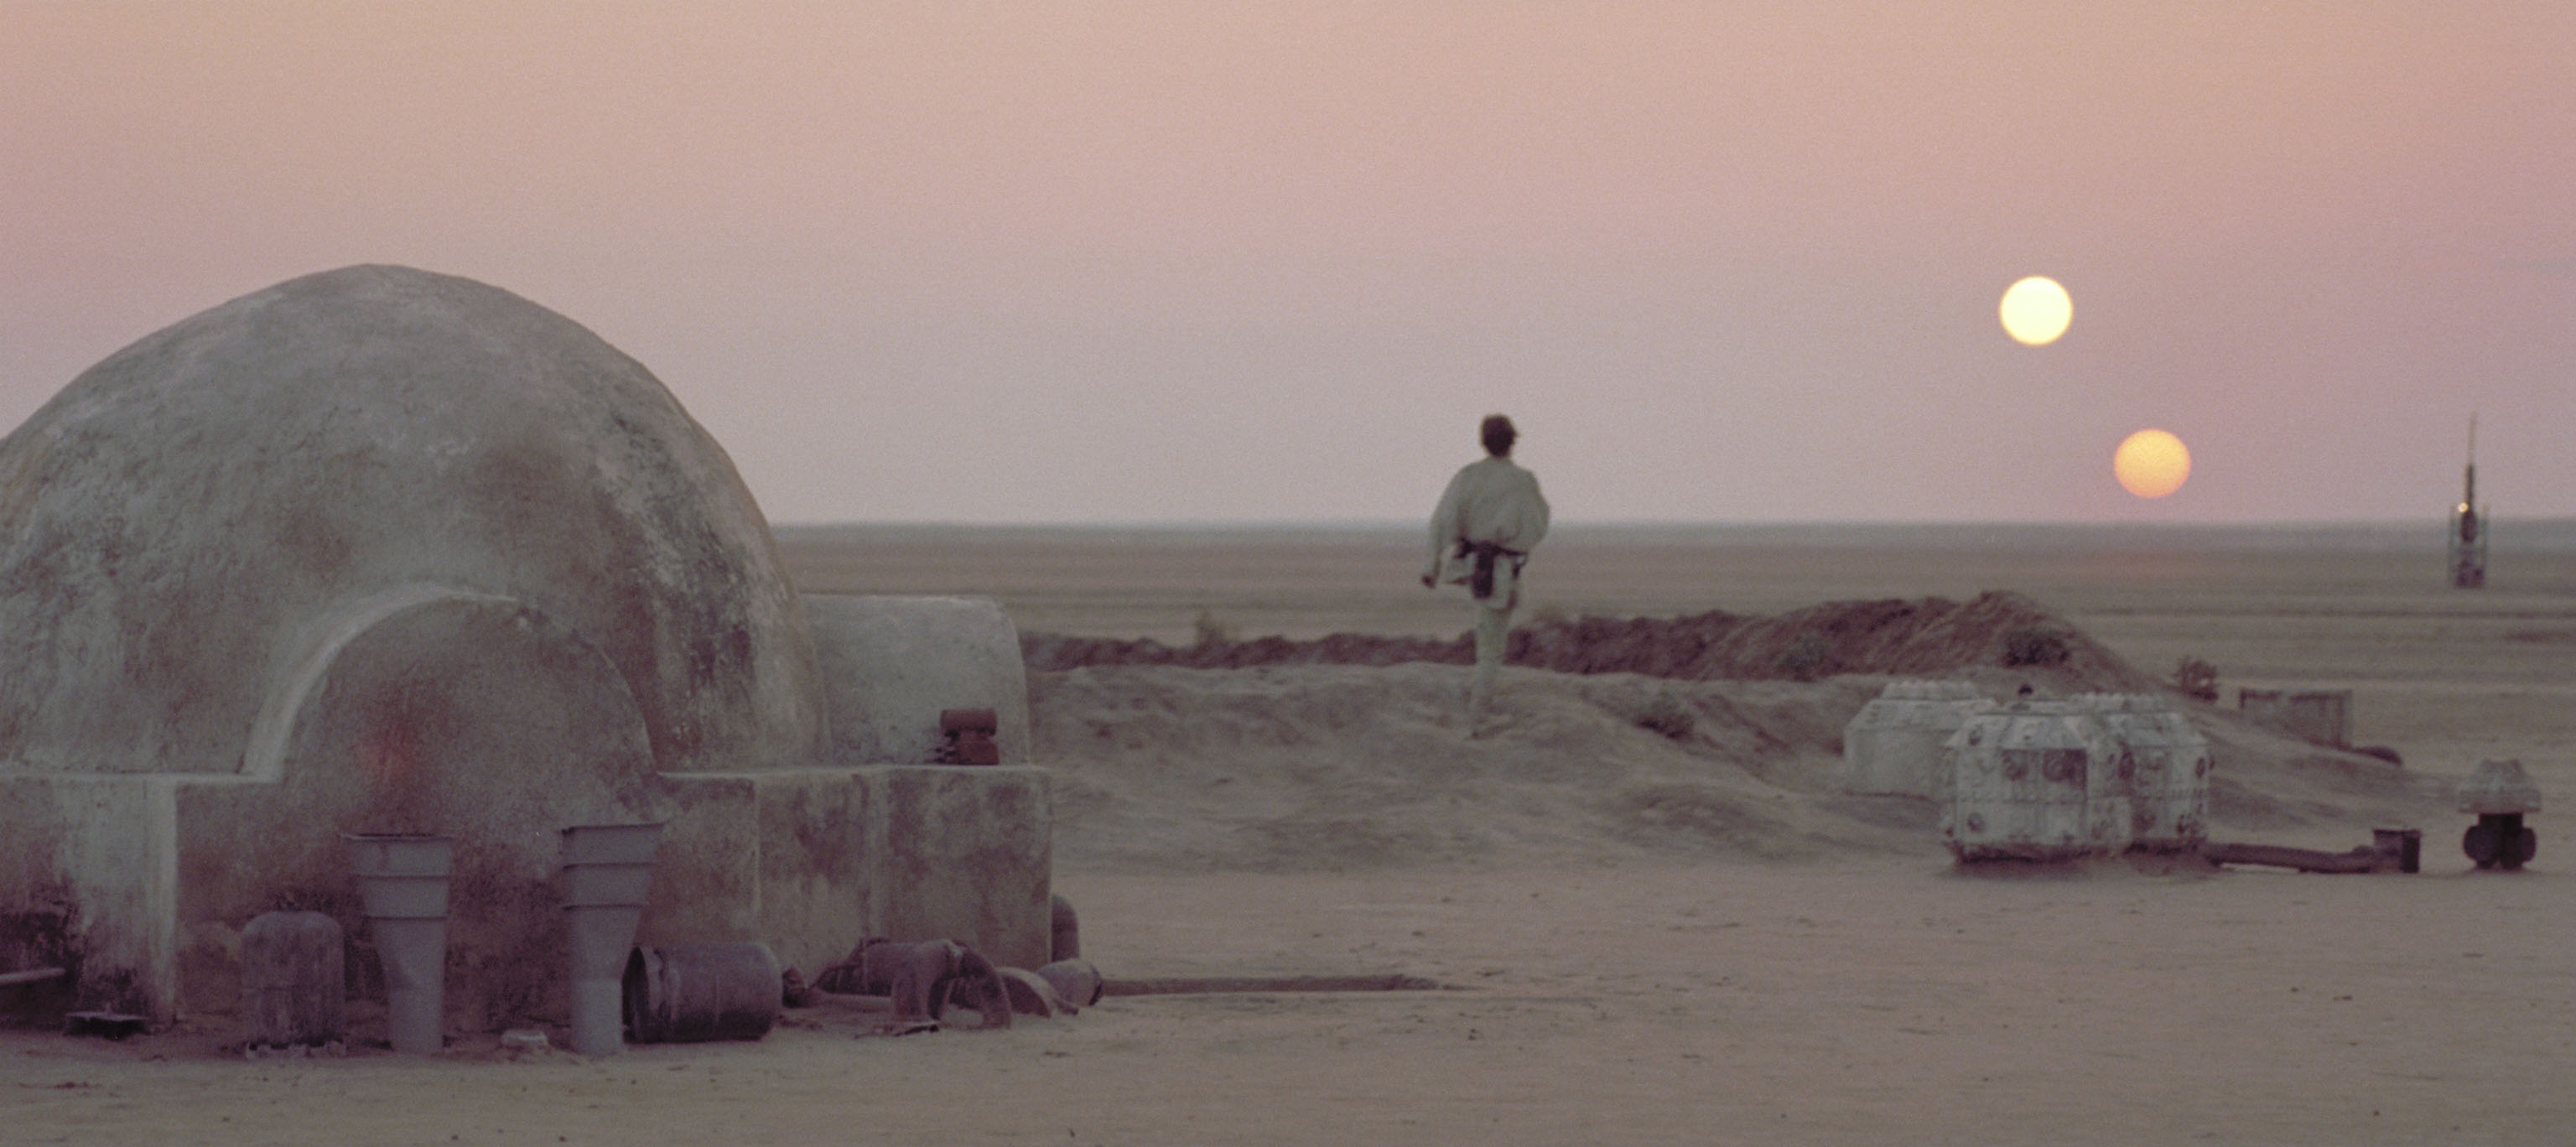 Tatooine and its double sunset